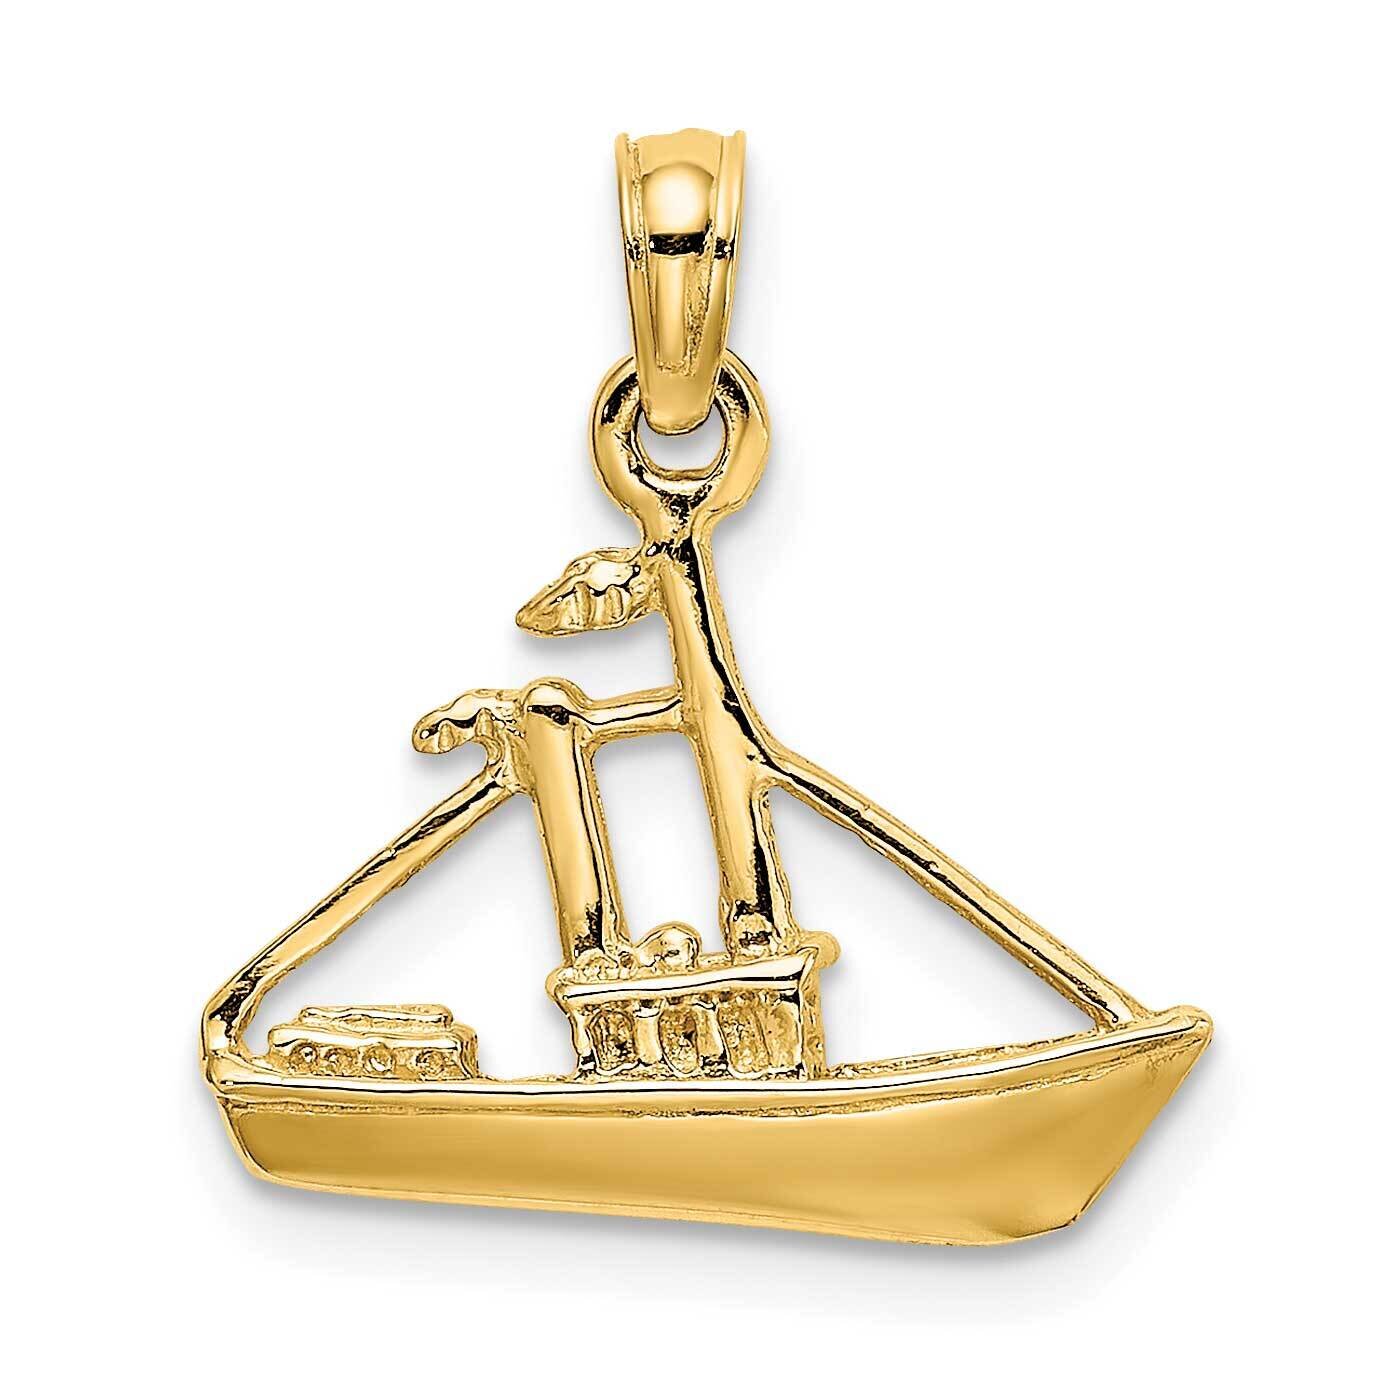 Cargo Ship with Tug Boat Charm 14k Gold 3-D K8099